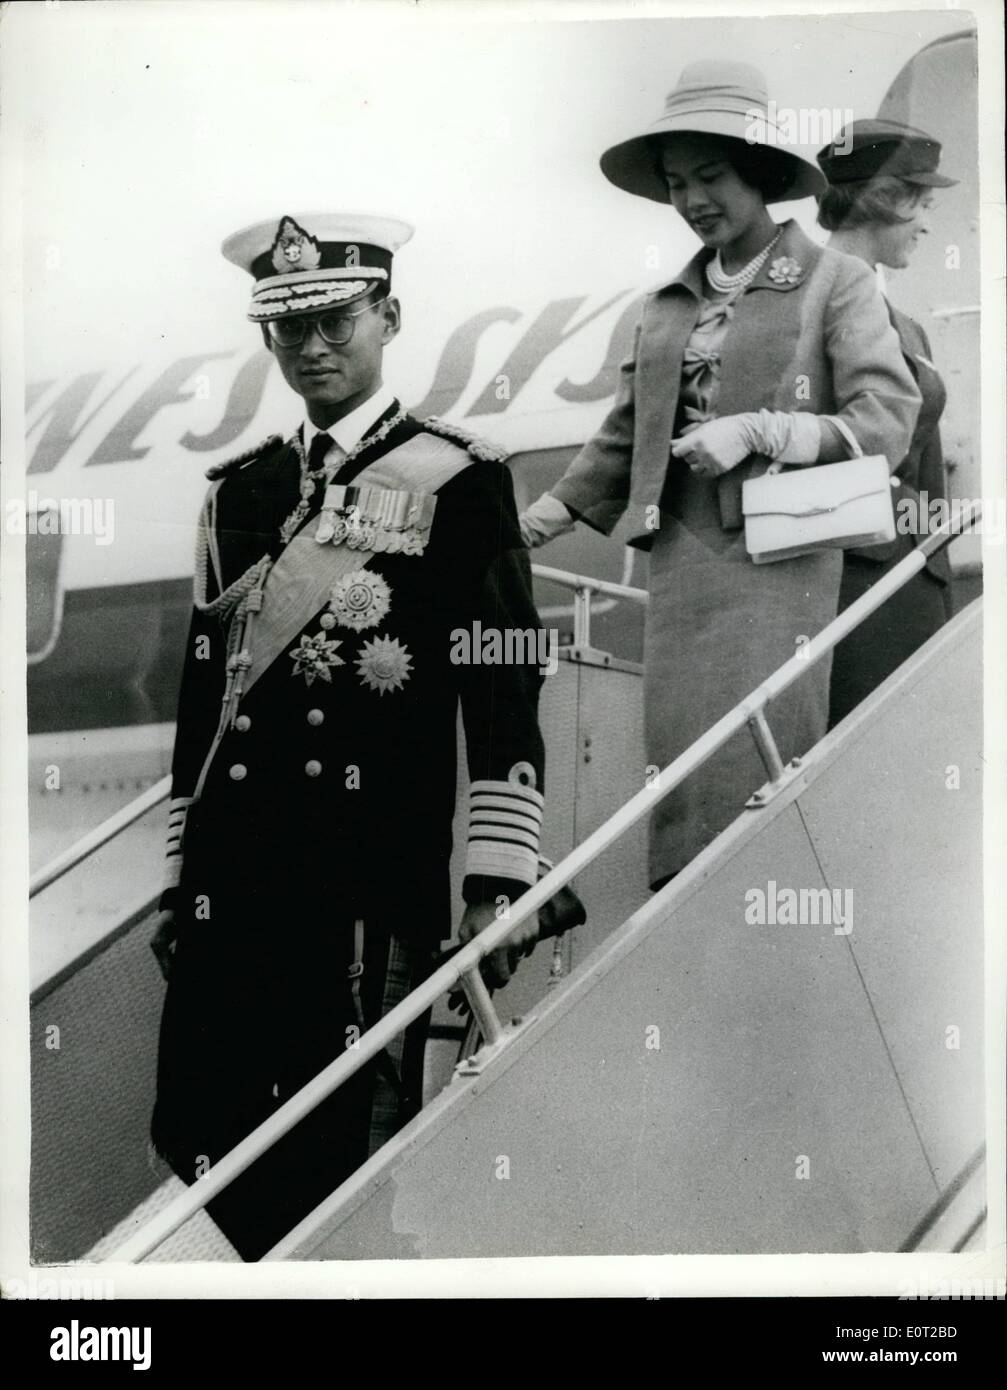 Jul. 07, 1960 - King and Queen of Thailand arrive for state visit: King Phumipol of Thailand, wearing naval uniform, and Queen Sirikit, in a mauve suit, pictured leaving the aircraft on arrival at Gatwick Airport from Geneva today, for a three day State visit to Britain. They traveled from the airport by train to London, where they were welcomed by the Queen and Prince Philip. Stock Photo